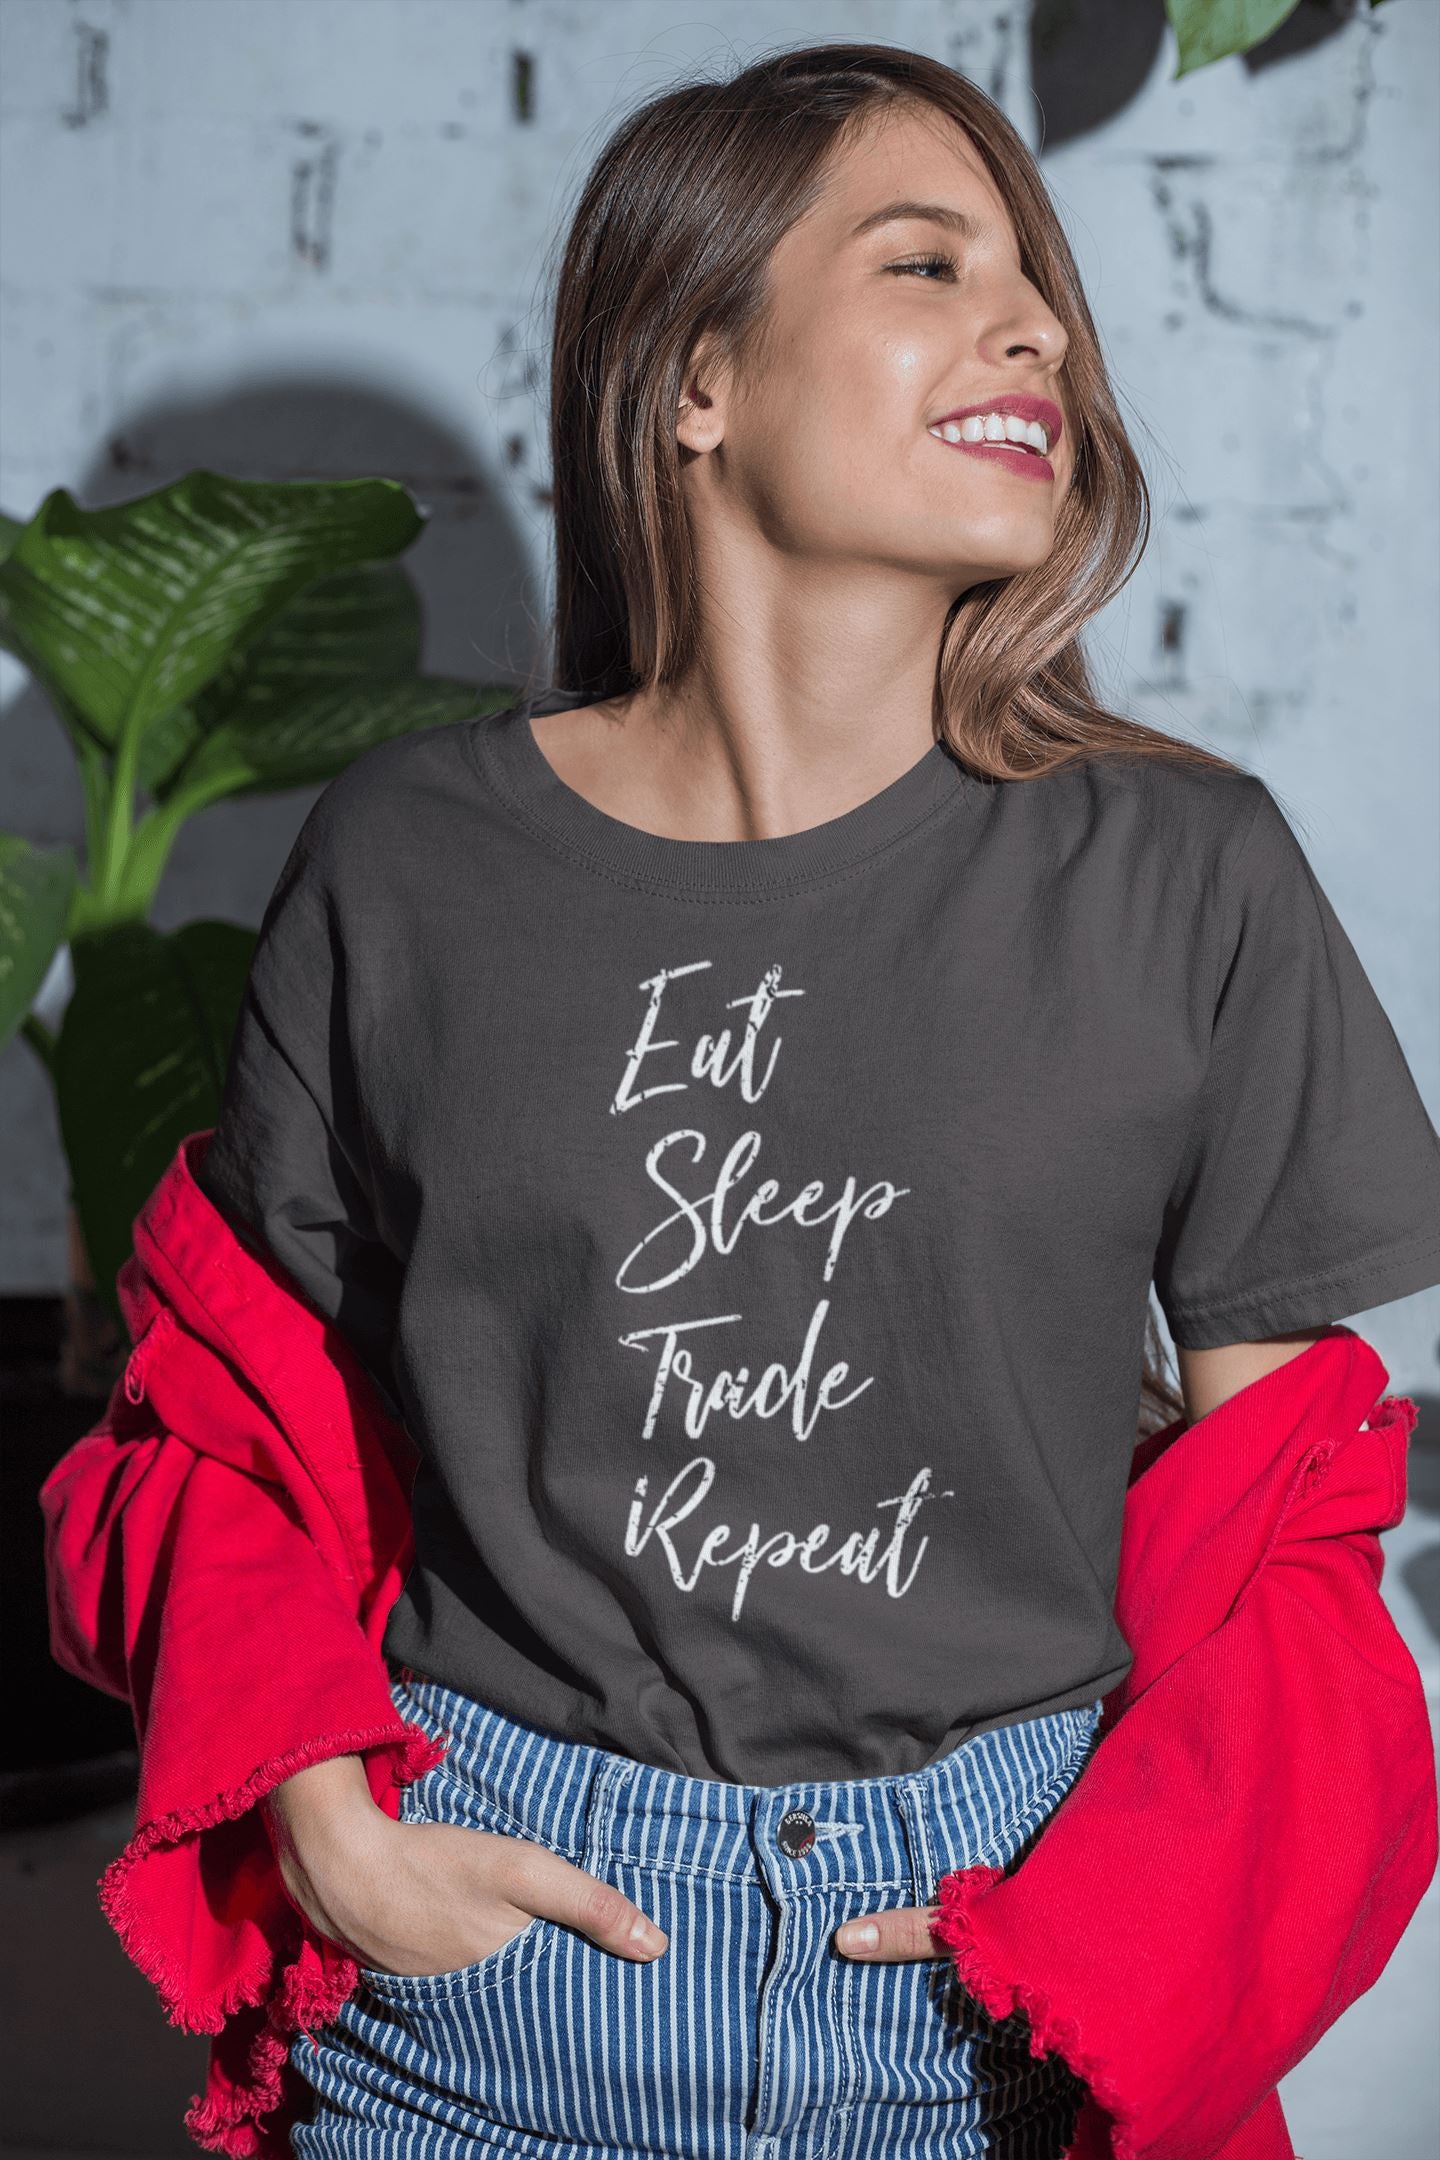 Eat Sleep Trade Repeat Special Charcoal Grey T Shirt for Men and Women - Catch My Drift India  bse, charcoal grey, clothing, female, general, grey, made in india, nse, shirt, stock market, t 